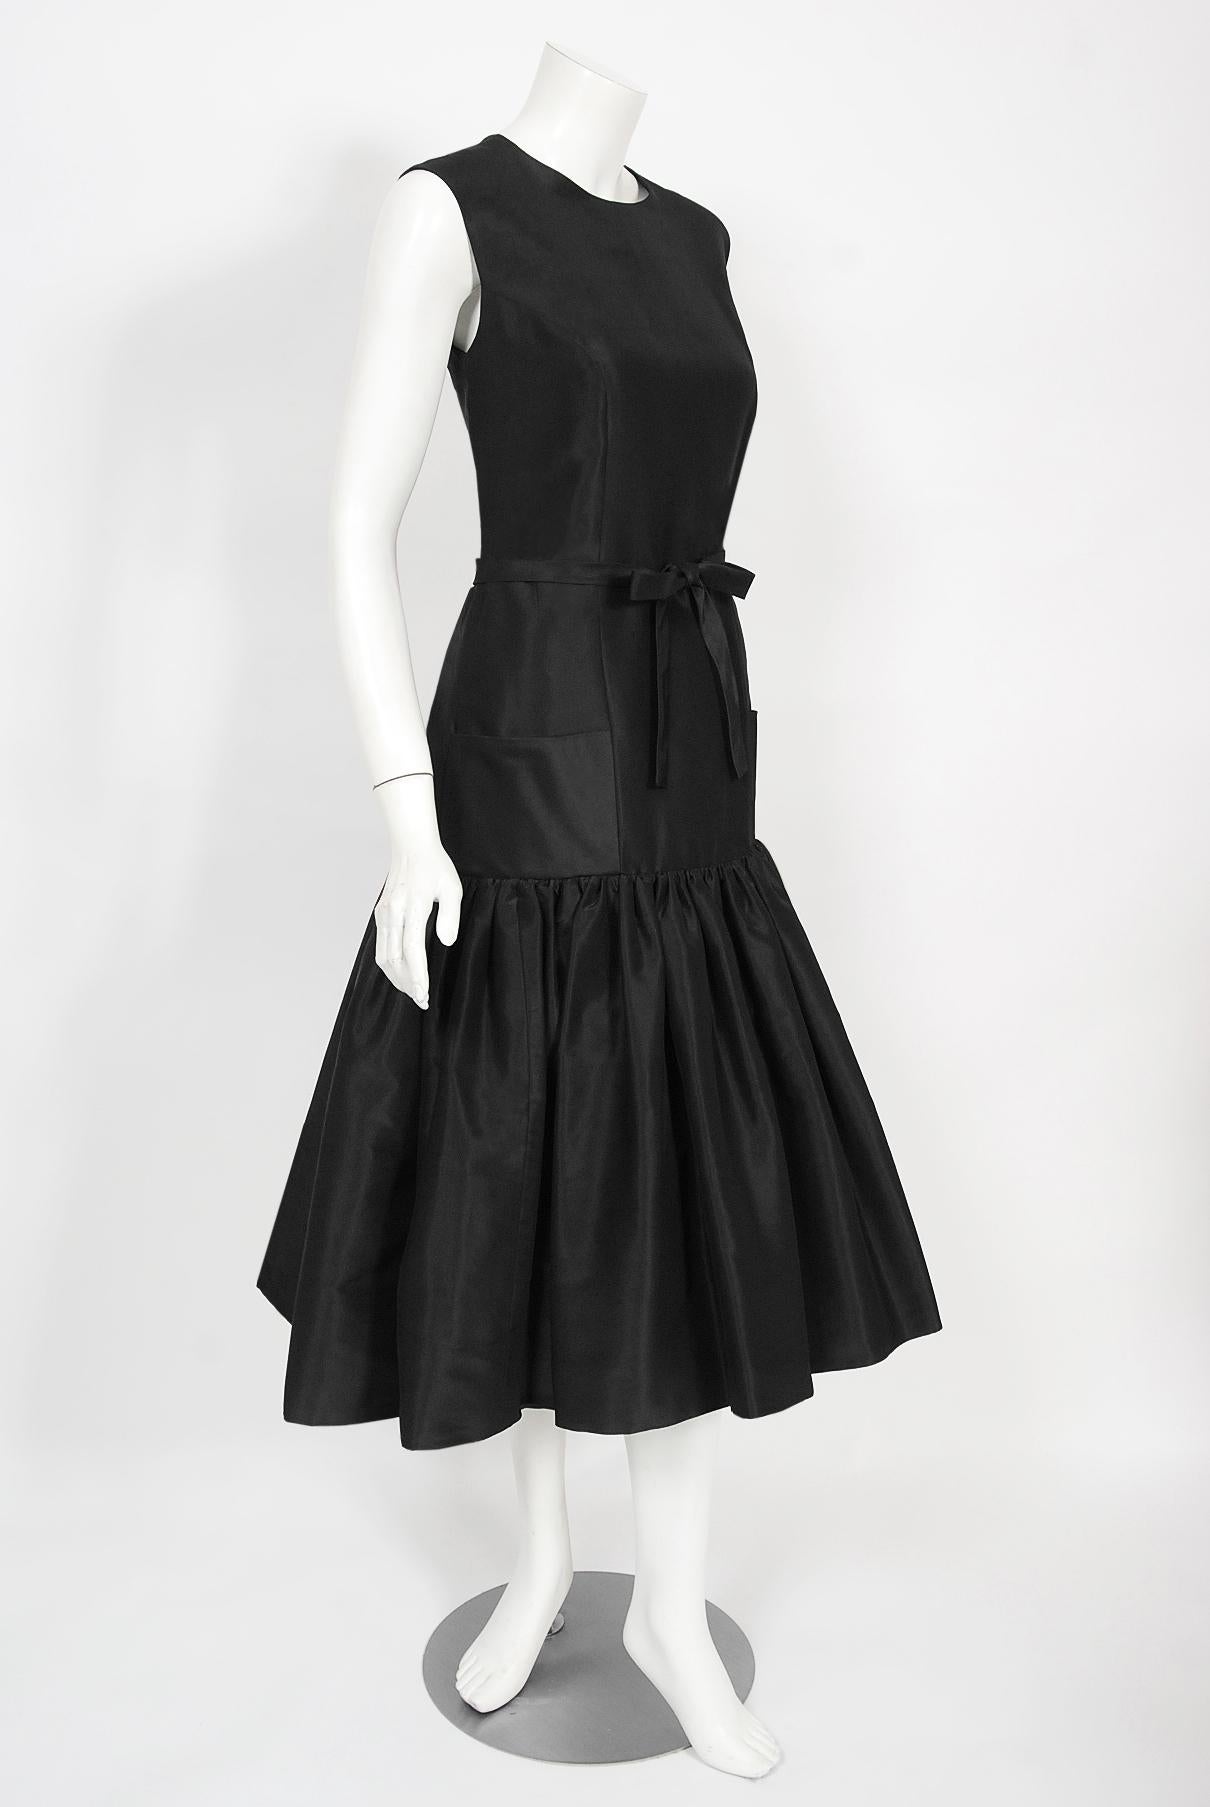 Vintage 1950's Traina-Norell Couture Black Silk Belted Flounce Cocktail Dress 5